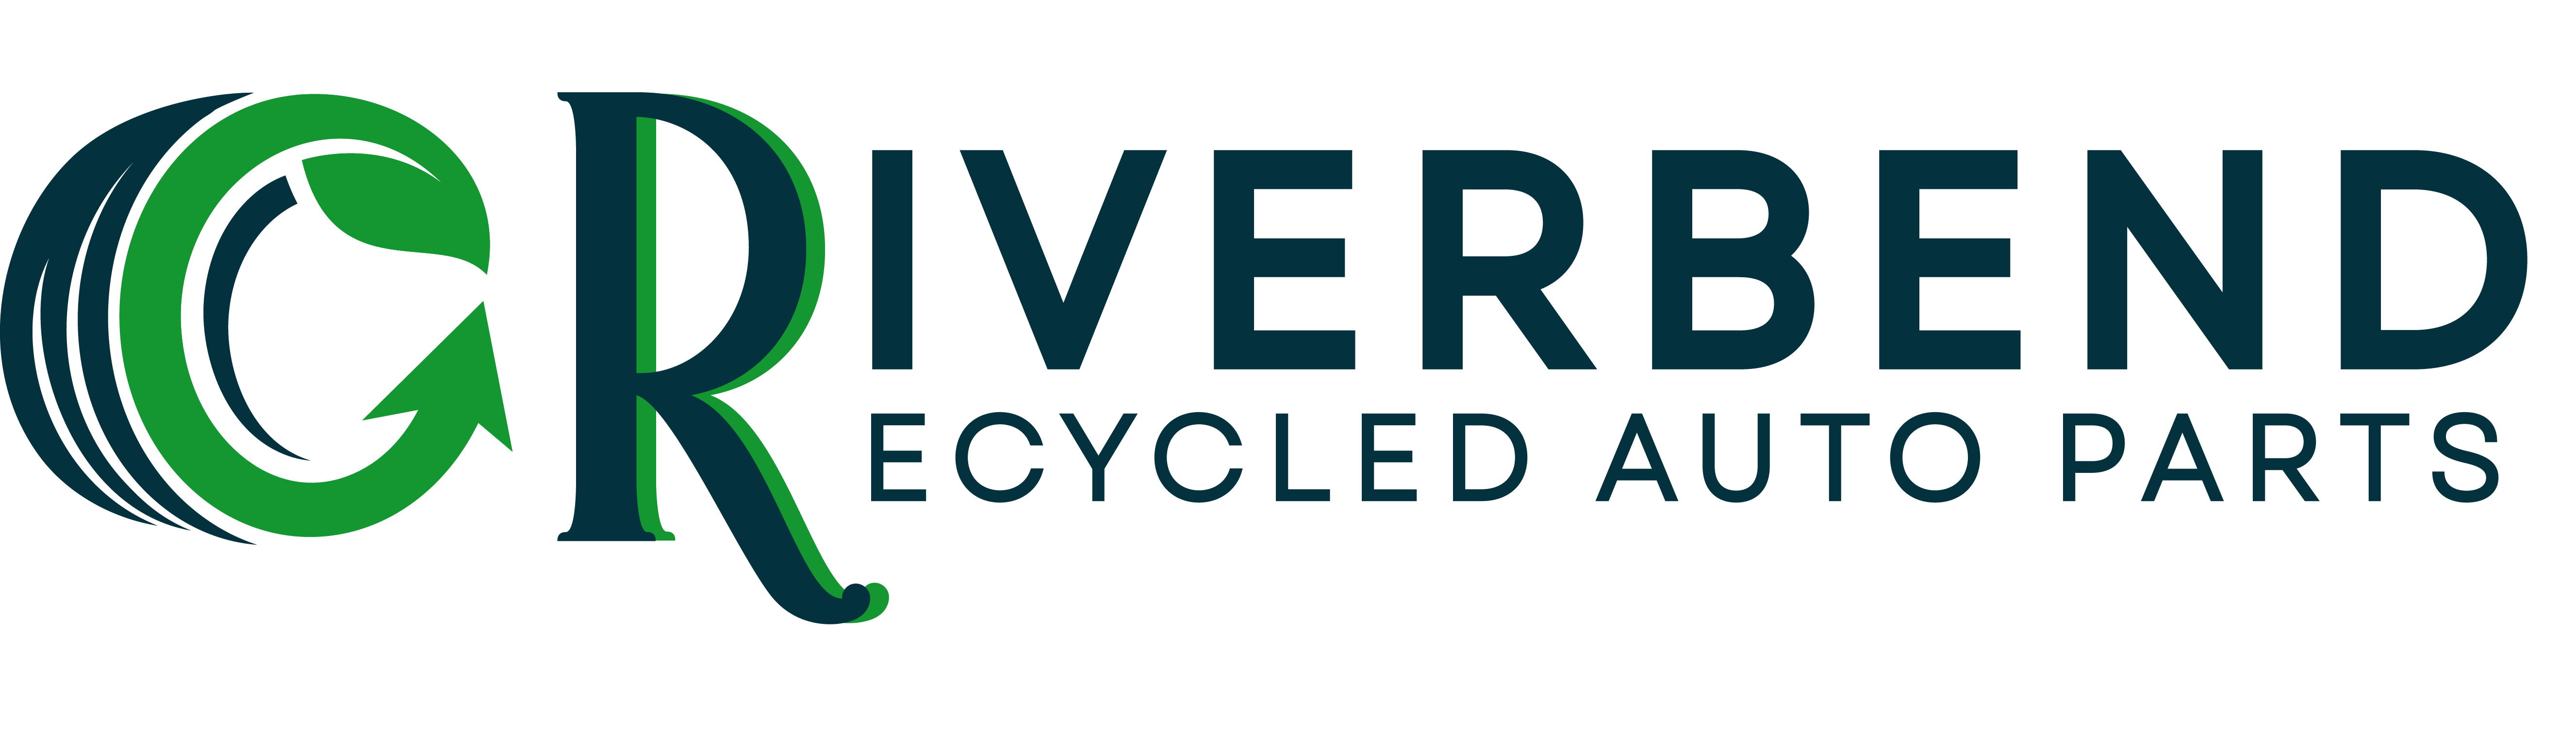 Riverbend Recycled Auto Parts